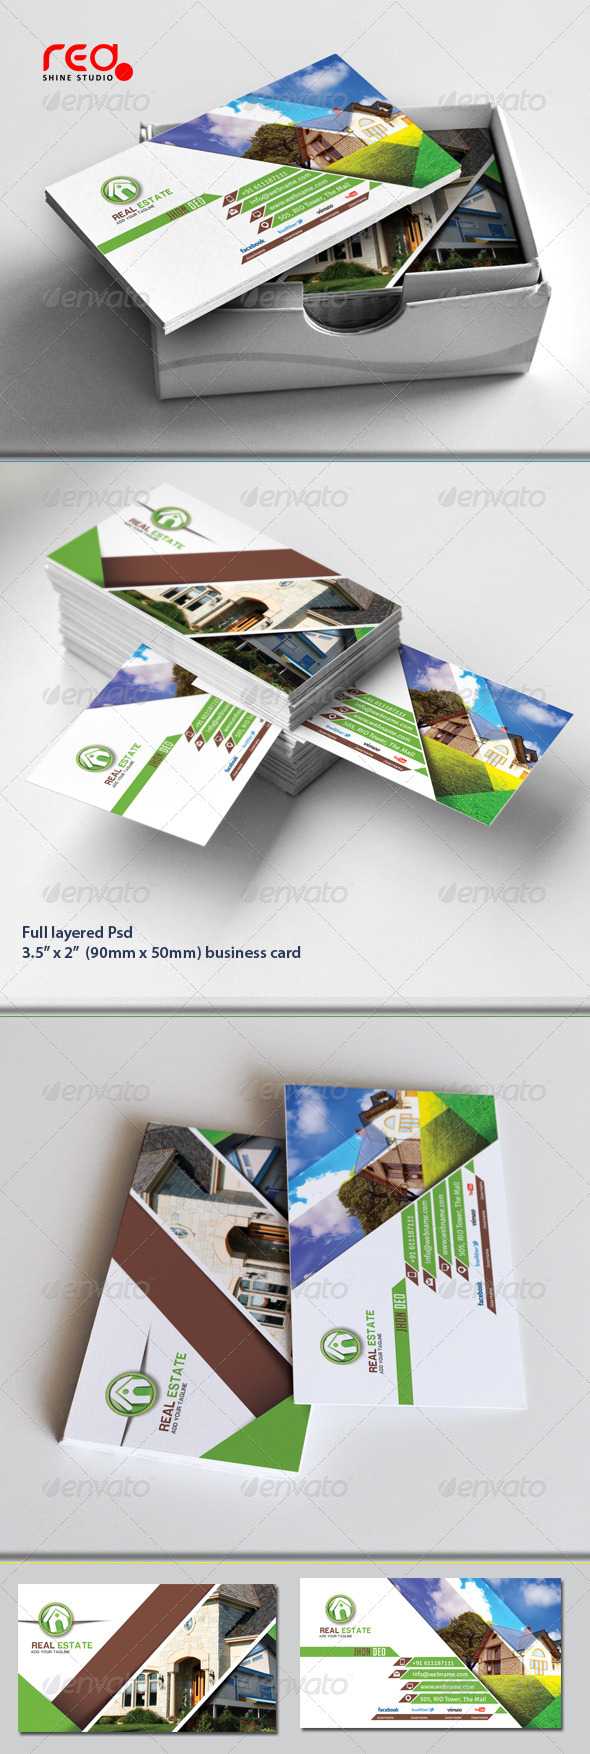 Real Estate Business Cards Graphics, Designs & Templates For Real Estate Business Cards Templates Free